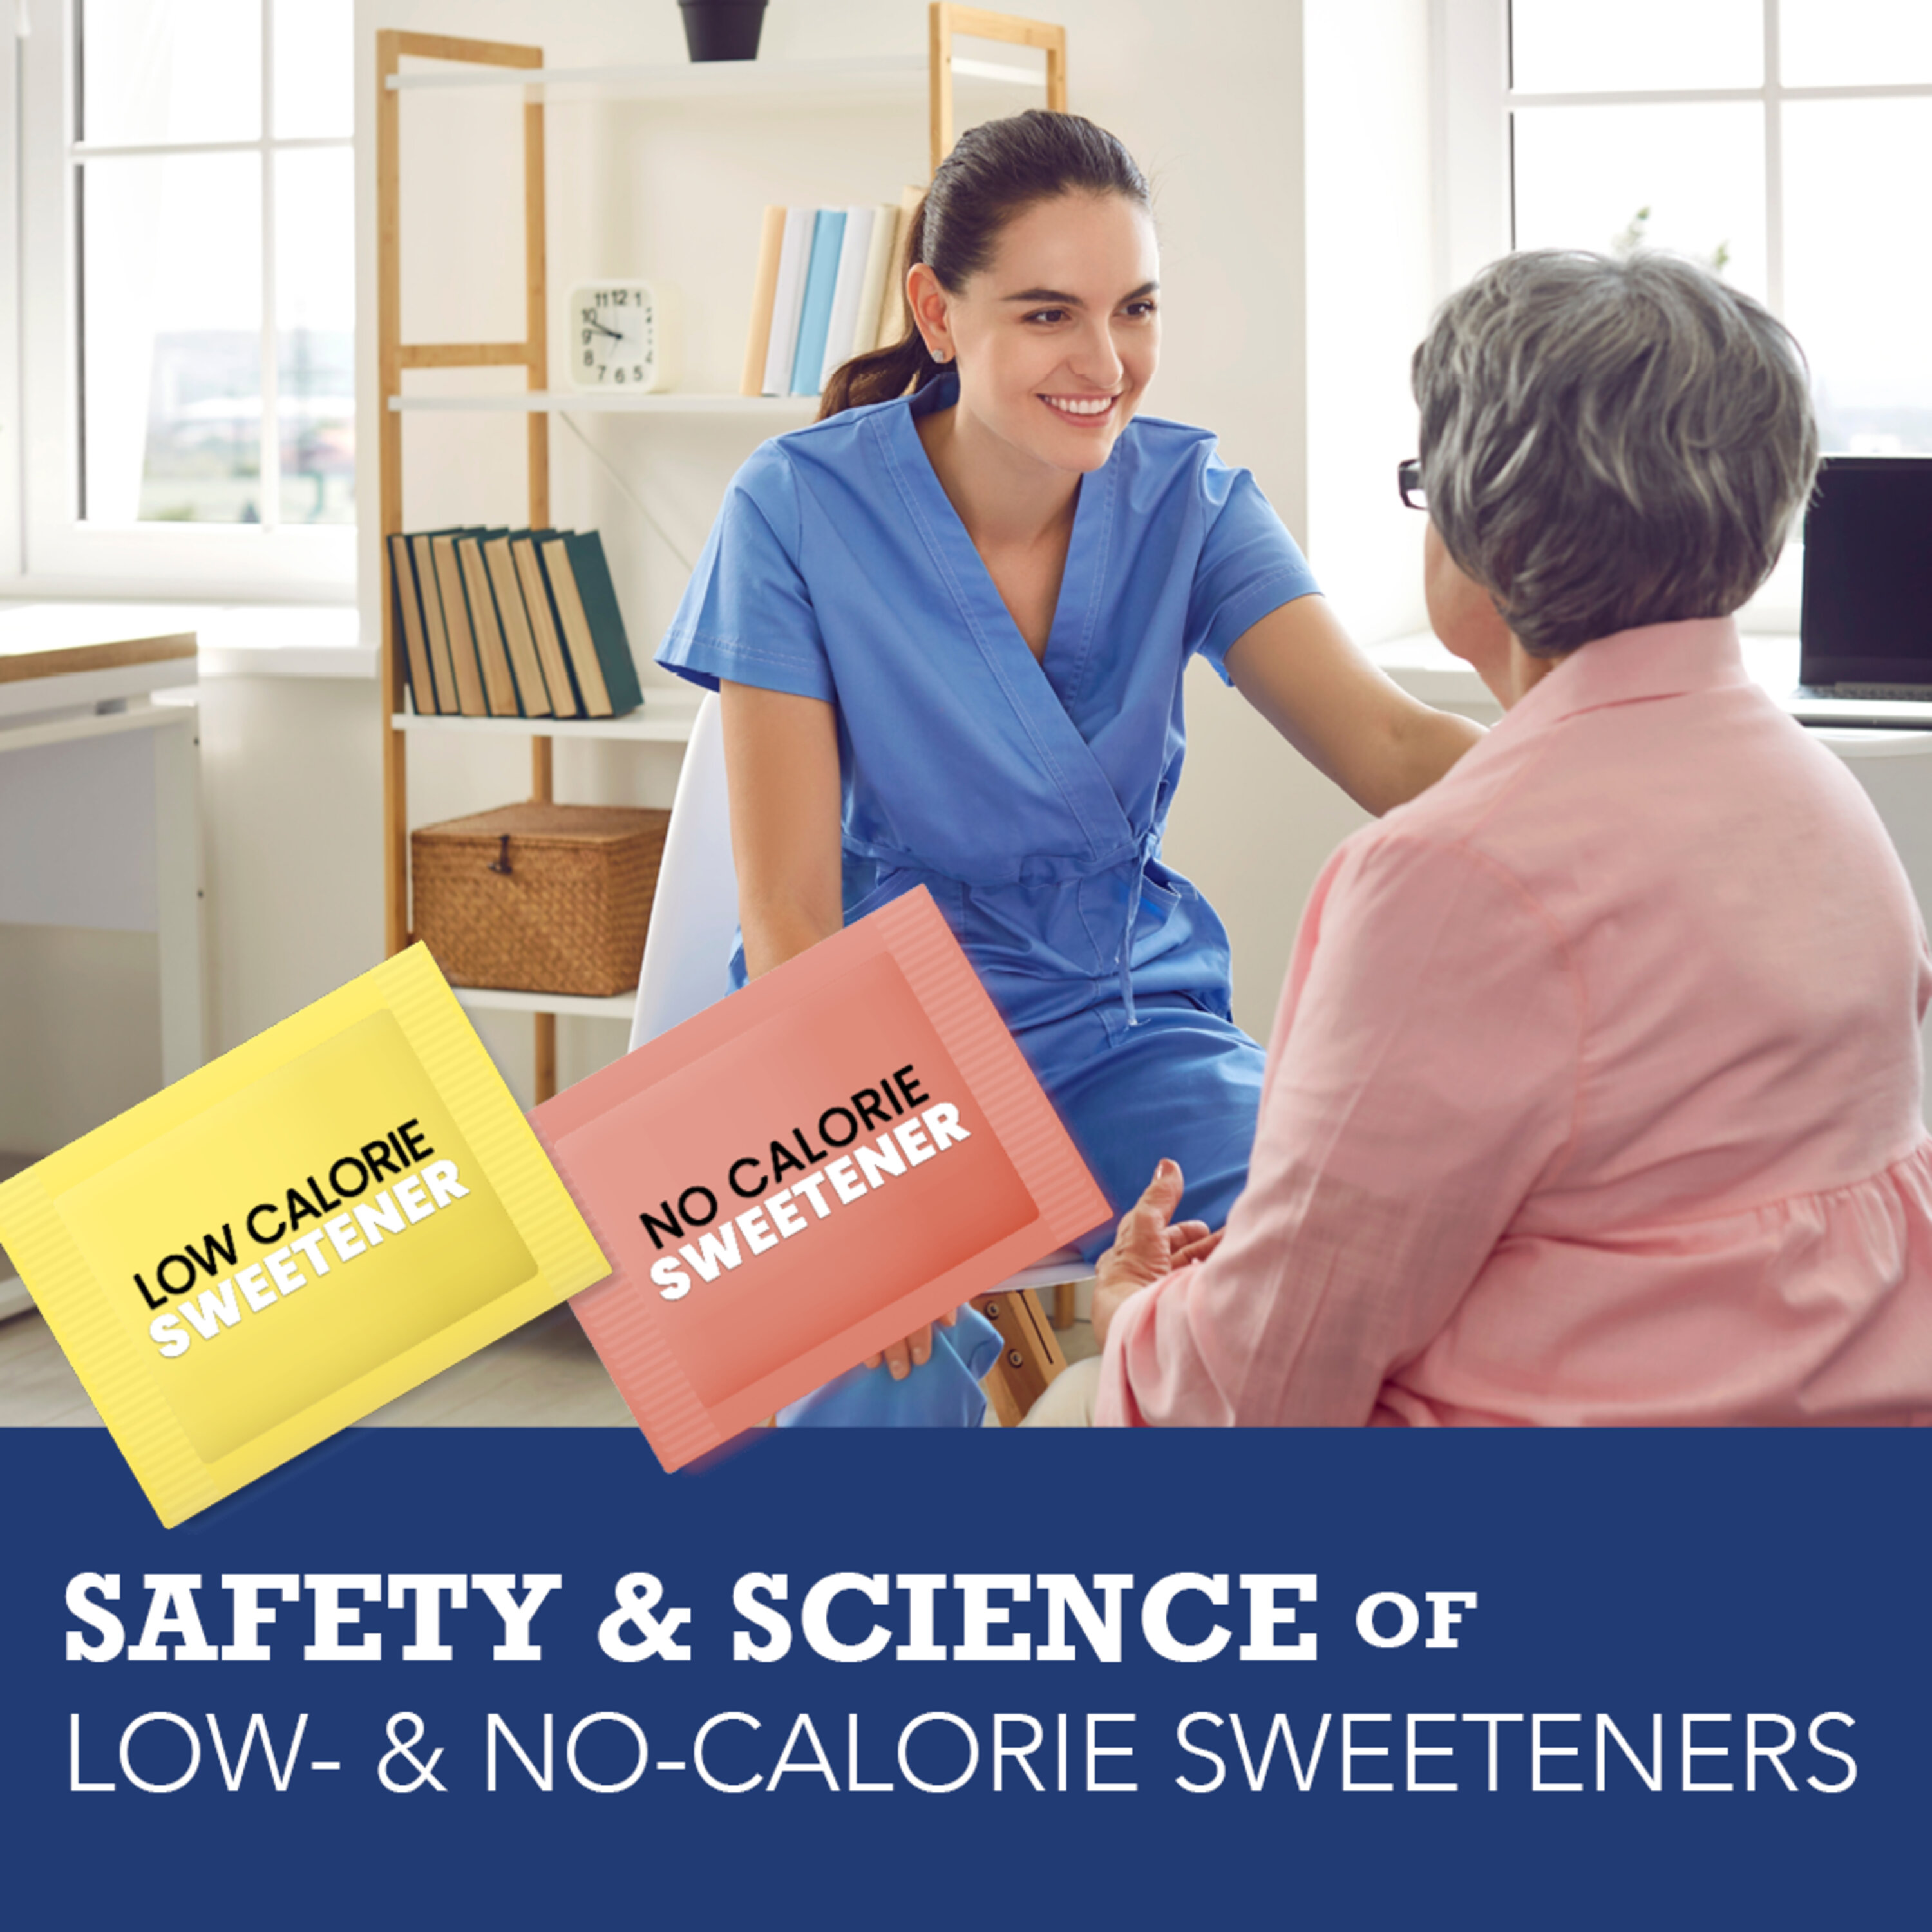 Safety & Science of Low- and No-Calorie Sweeteners